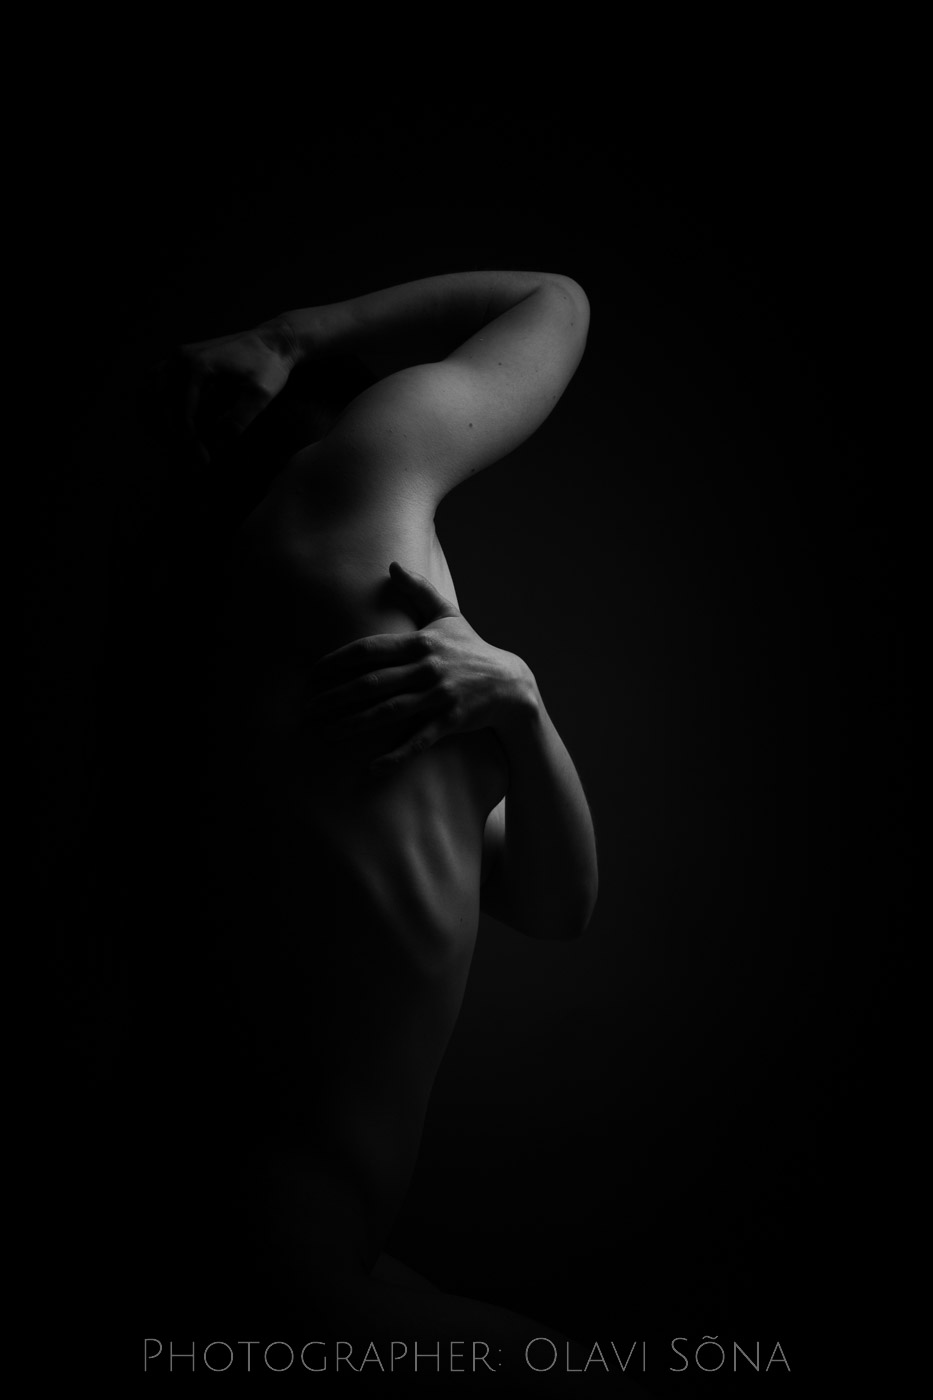 Touching your self - Nude Art Photography